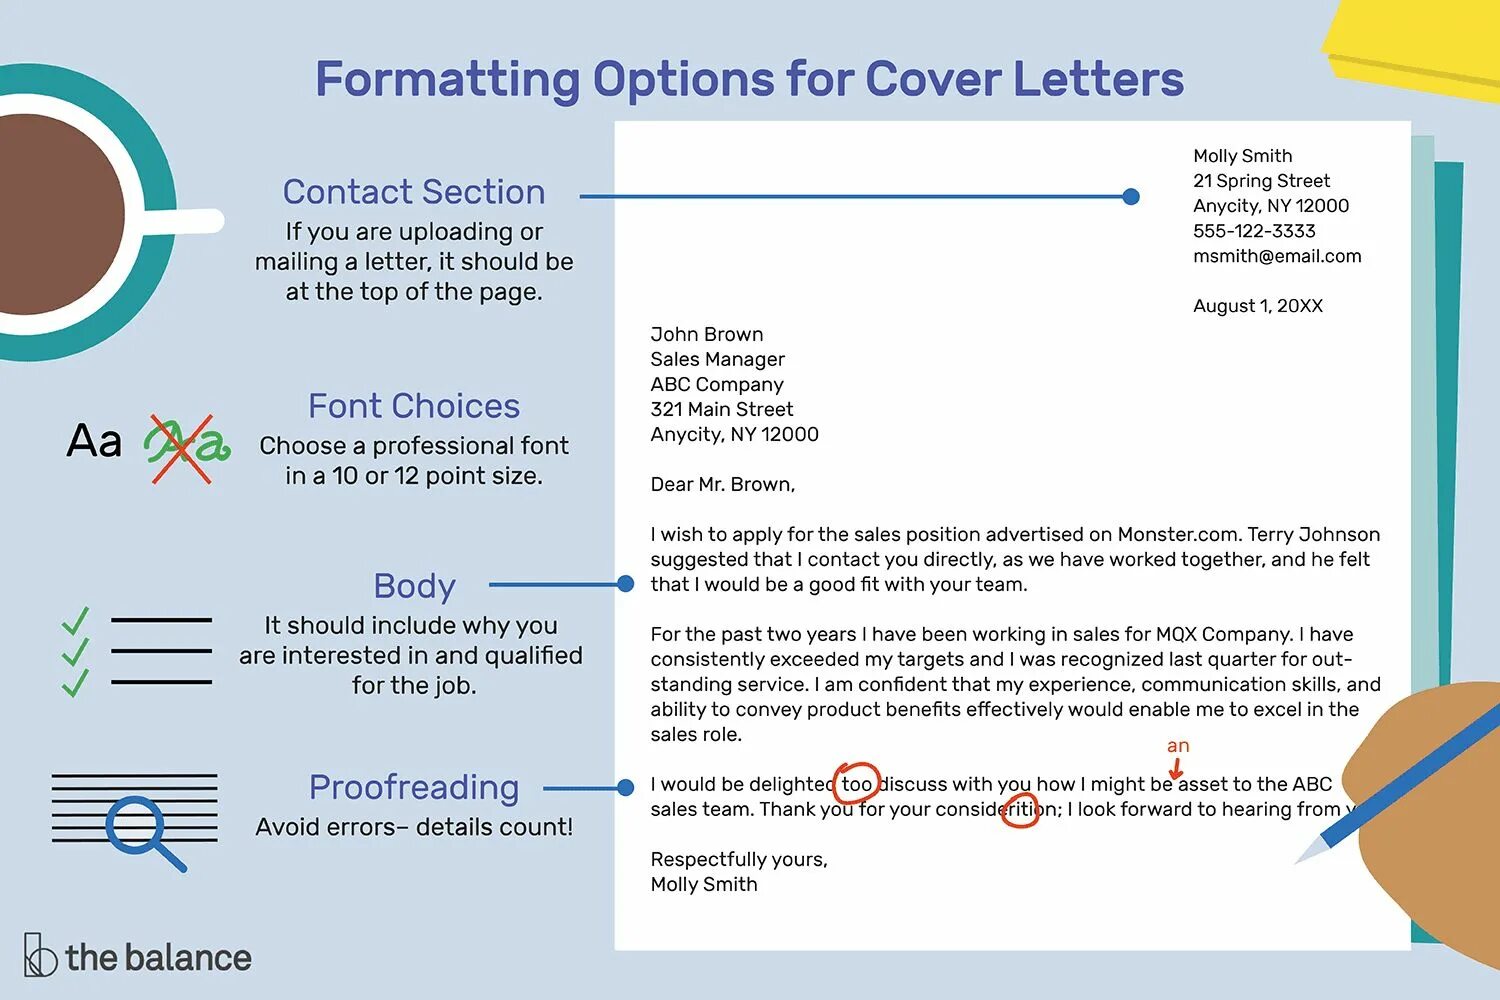 To include 4 more. Коверинг Леттер. Cover Letter examples. Covering Letter пример. Covering Letter example.